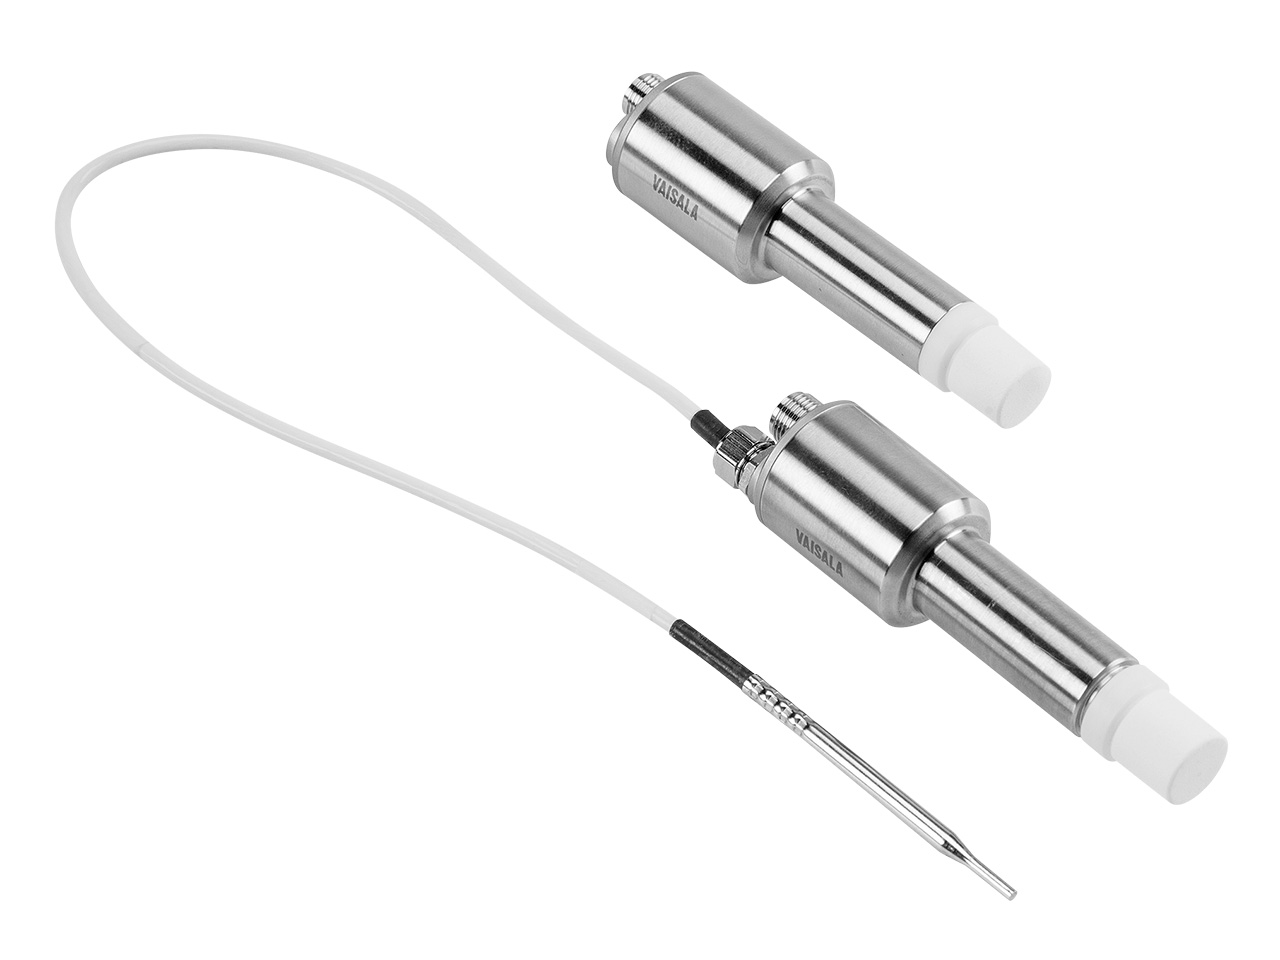 HPP271 and HPP272 the probes with PEROXCAP ® hydrogen peroxide sensor, H2O2 sensor for vaporized hydrogen peroxide concentration monitoring in bio - decontamination